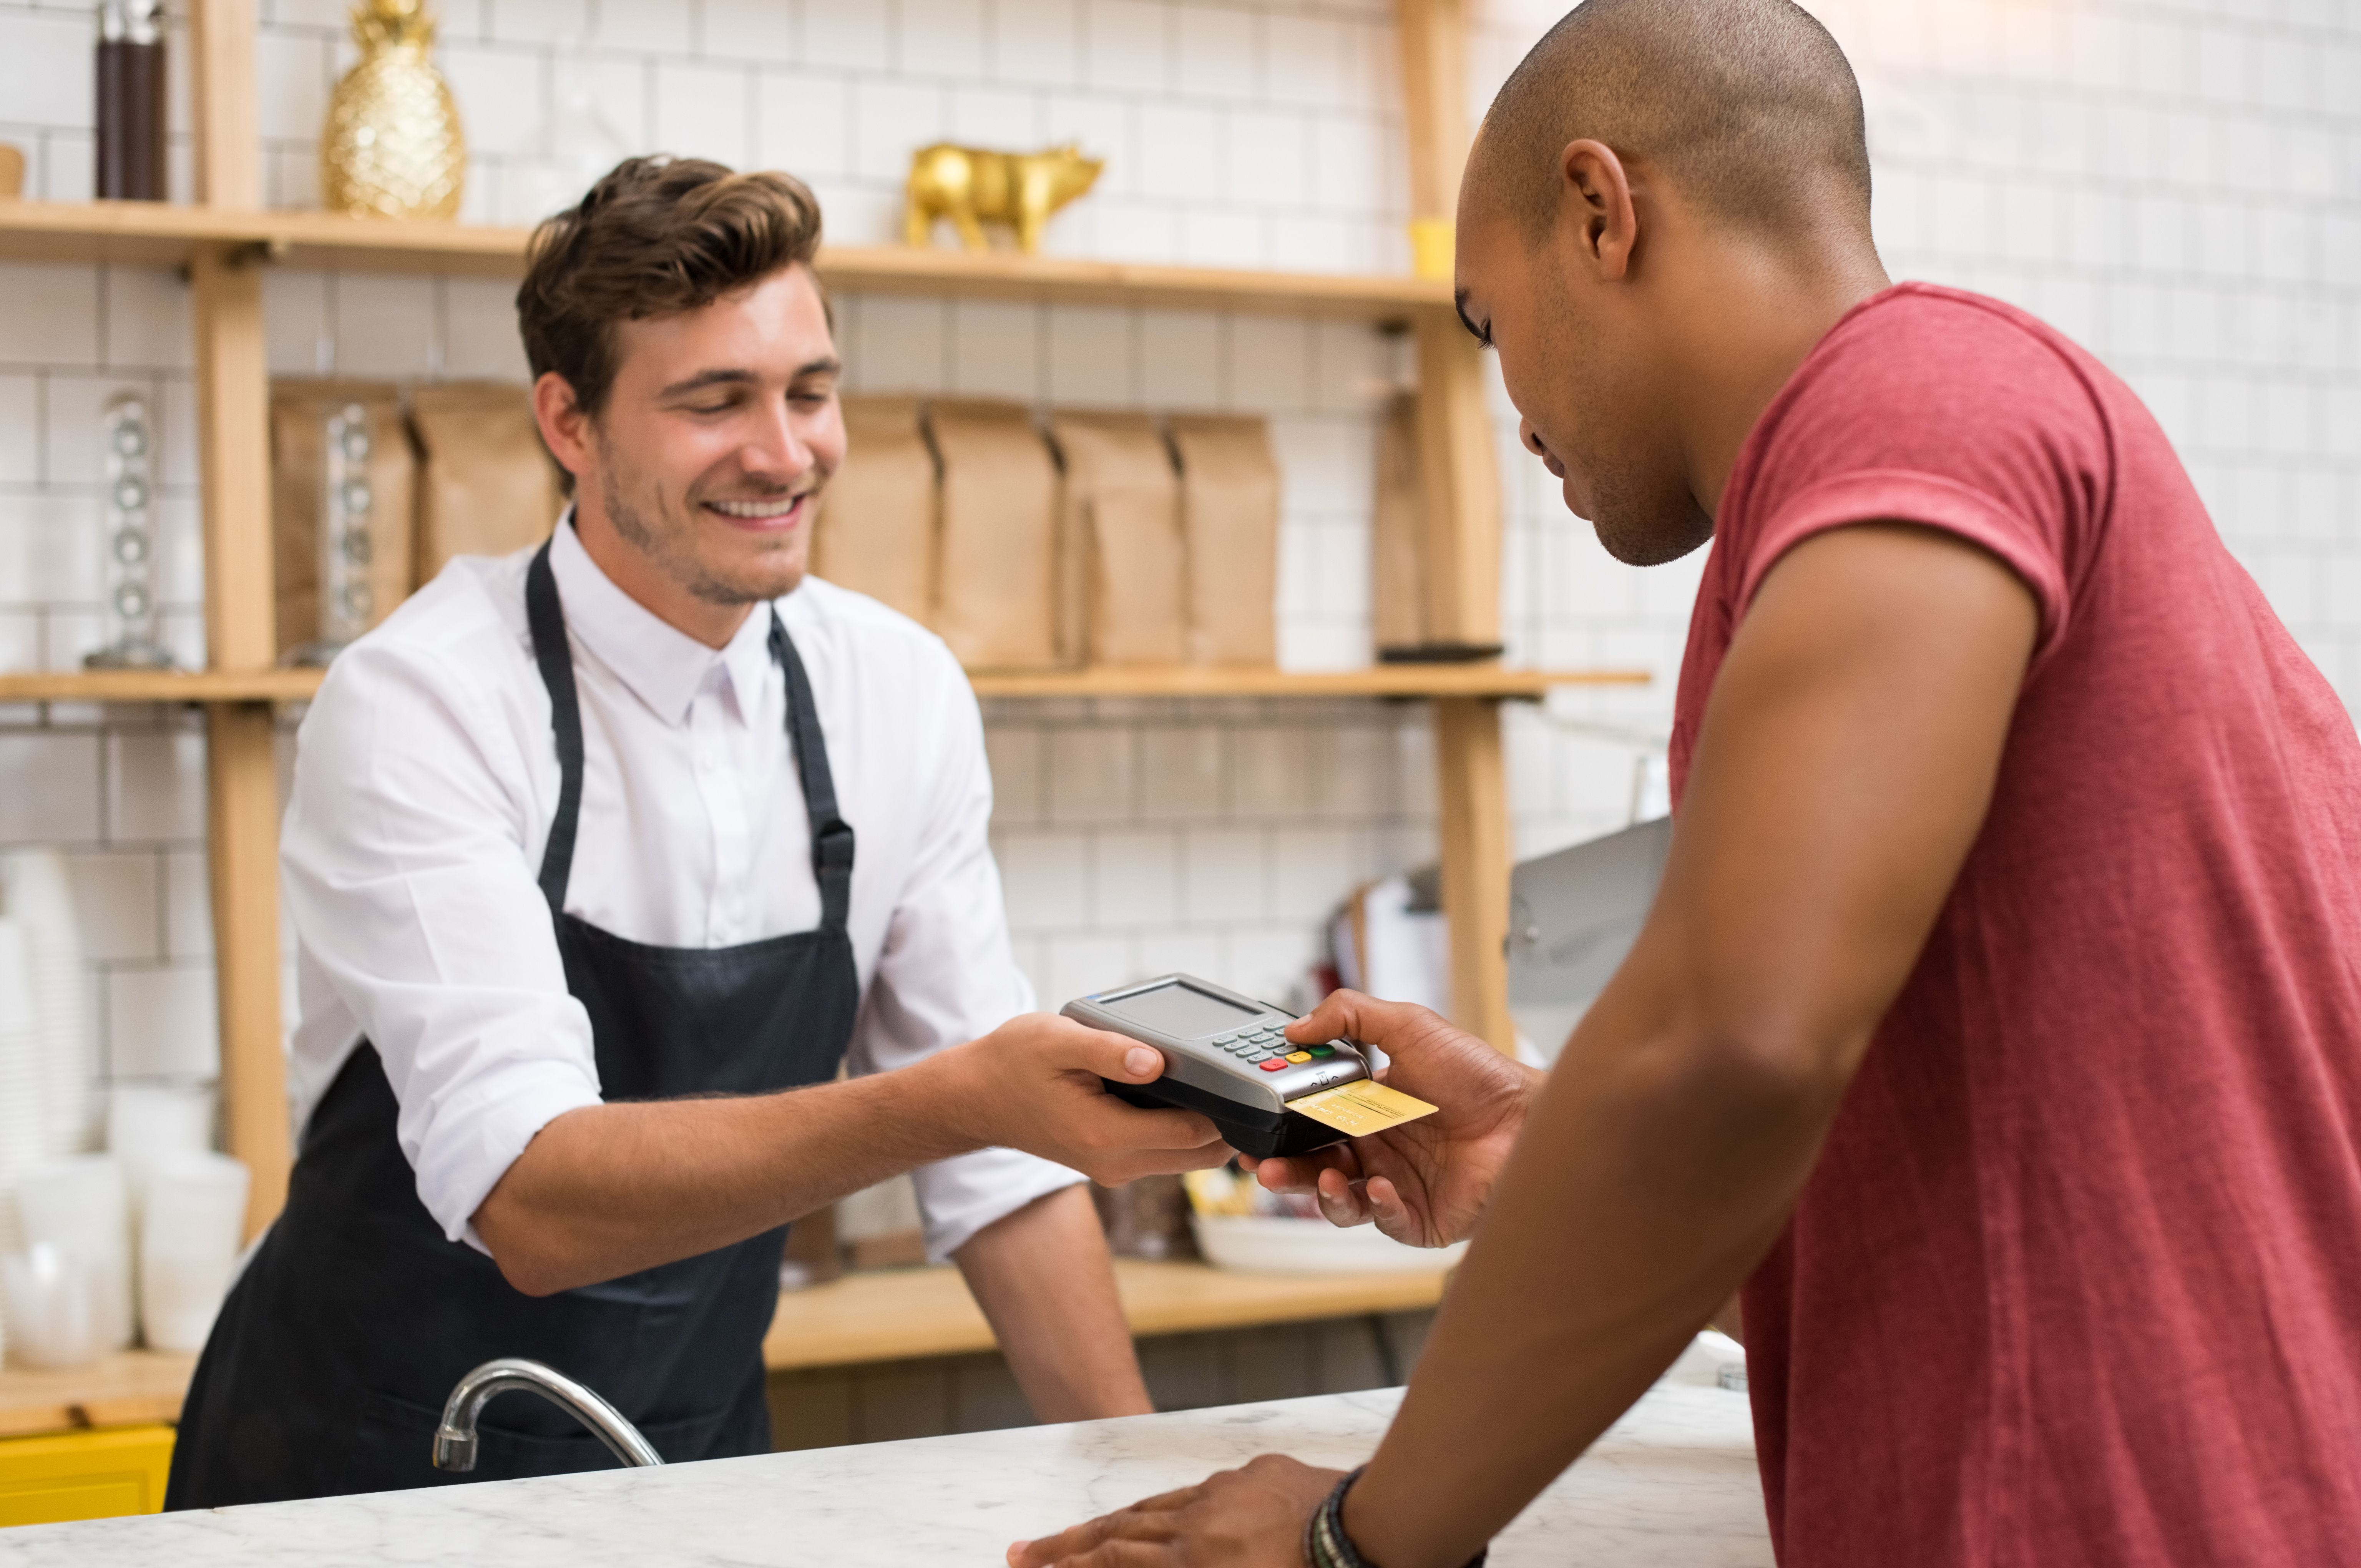 stock photo of store owner holding out credit card machine for customer to pay